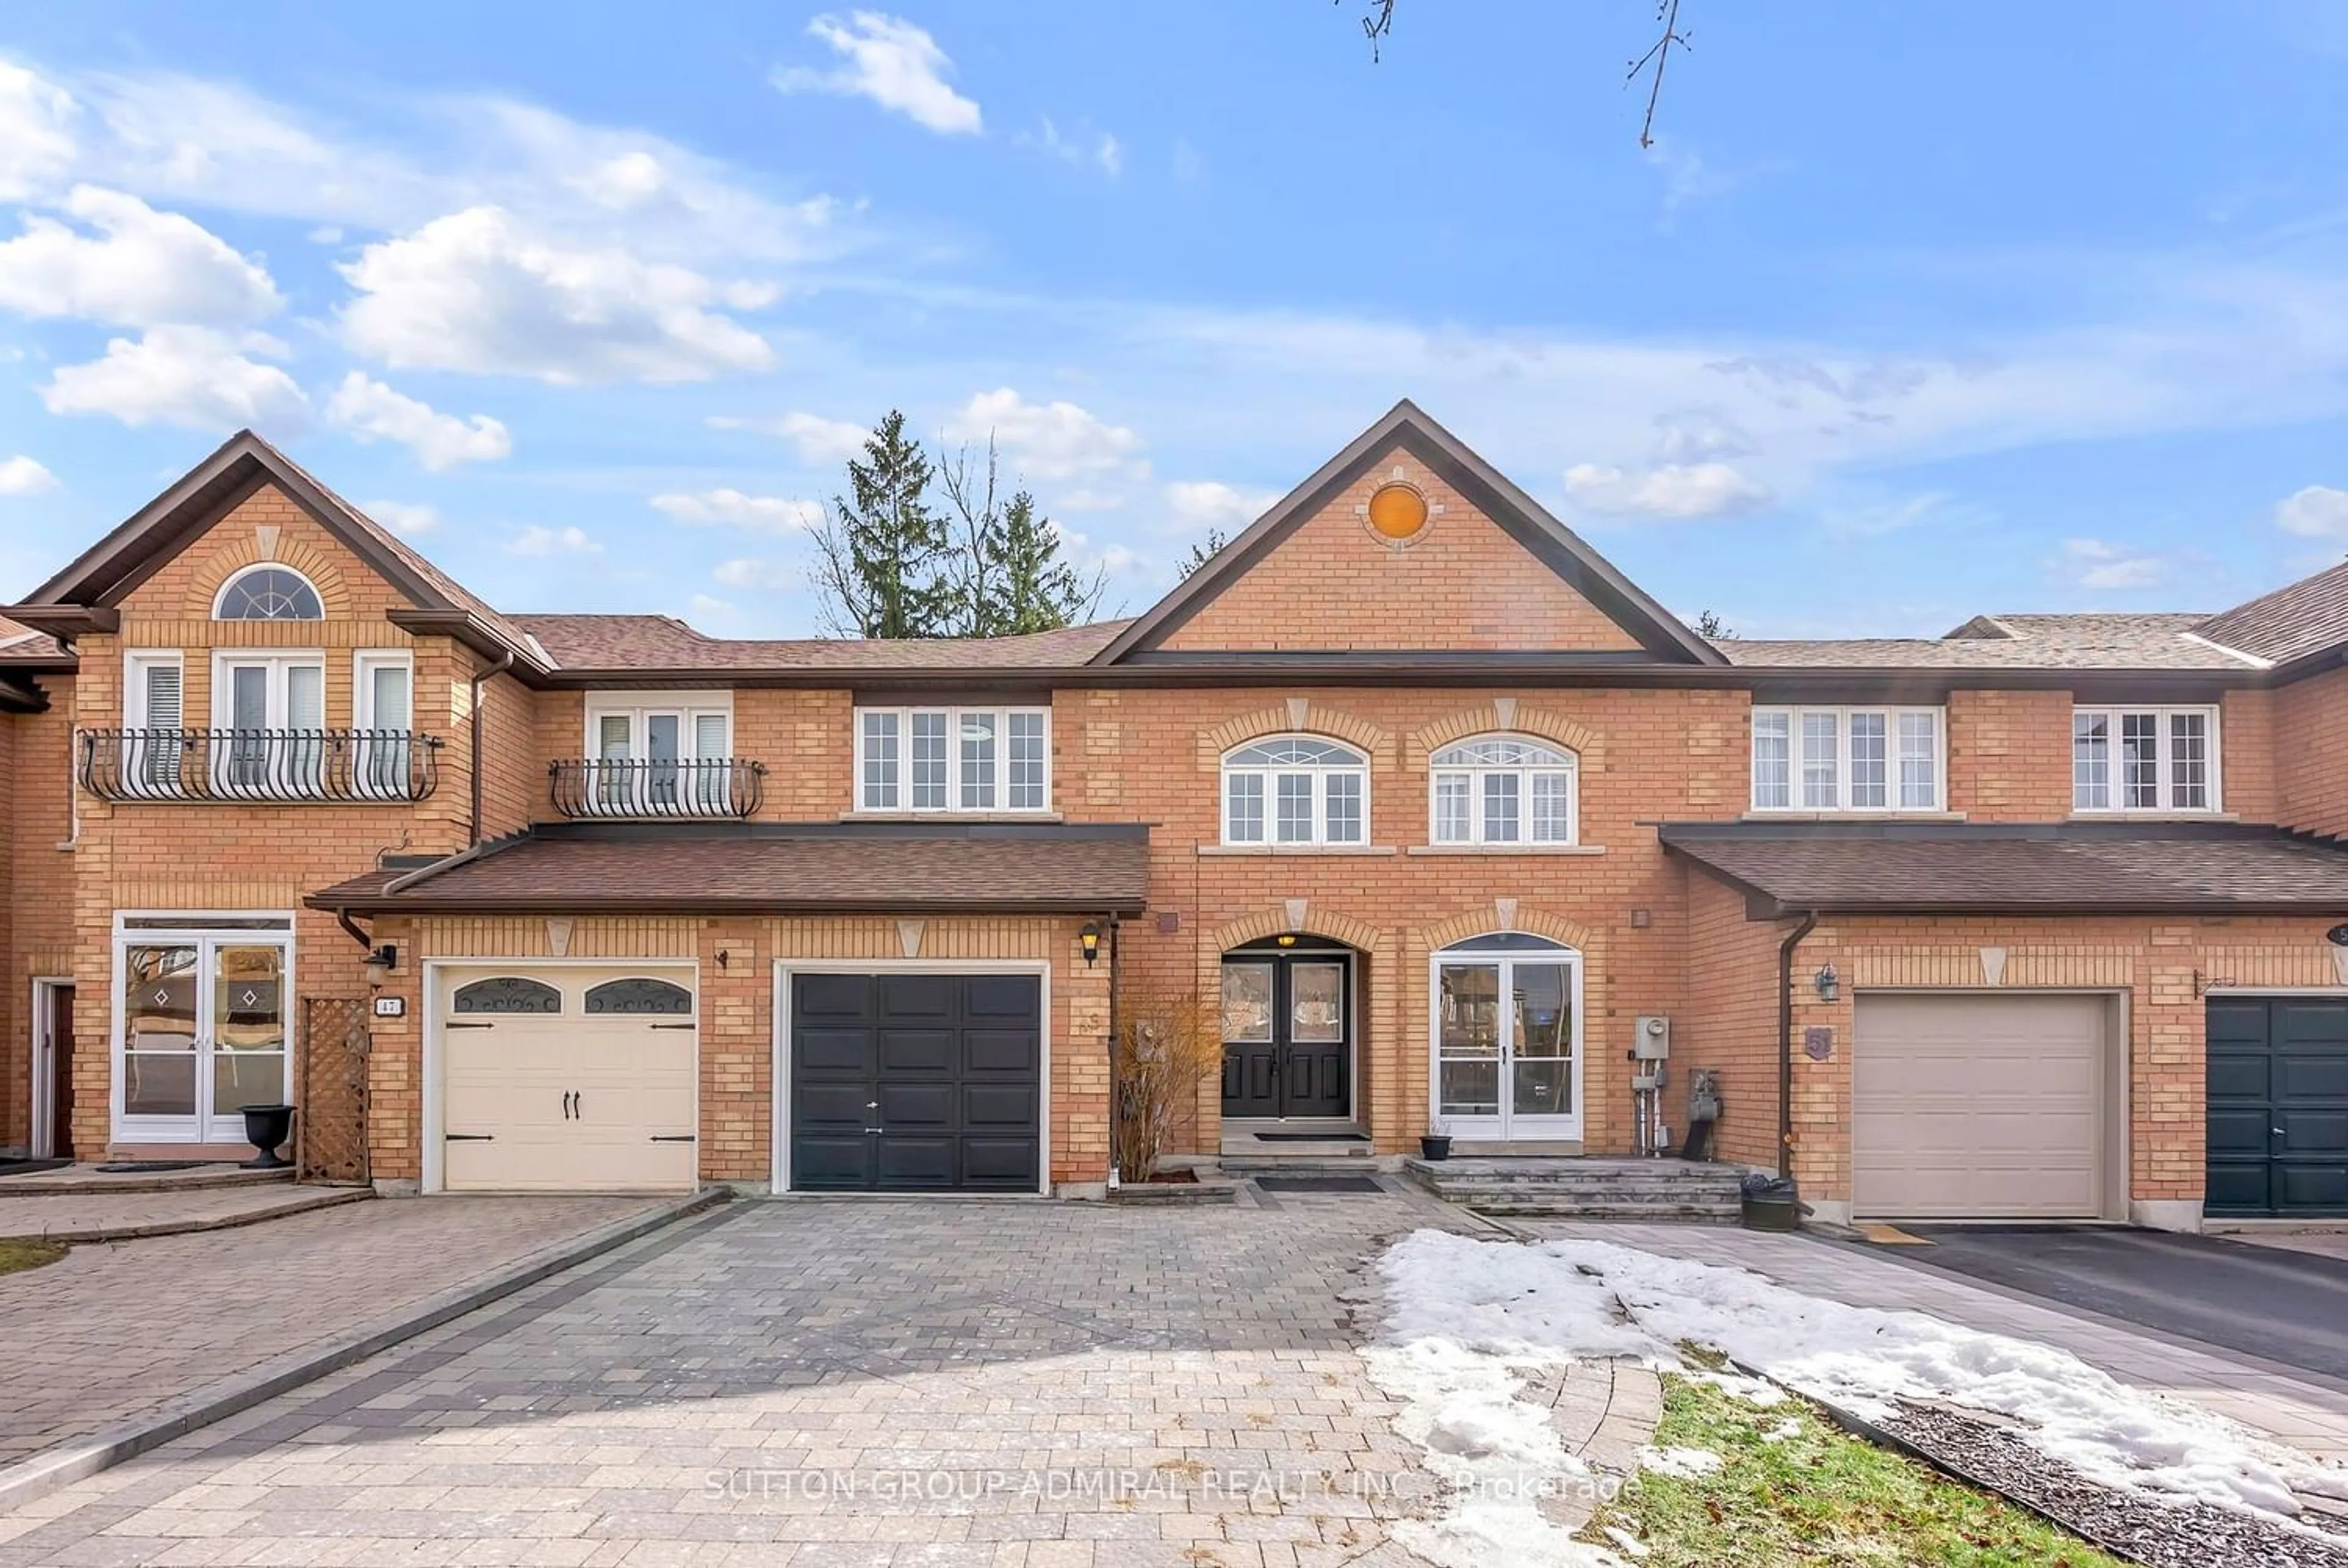 Home with stone exterior material for 49 Mistleflower Crt, Richmond Hill Ontario L4E 3T9